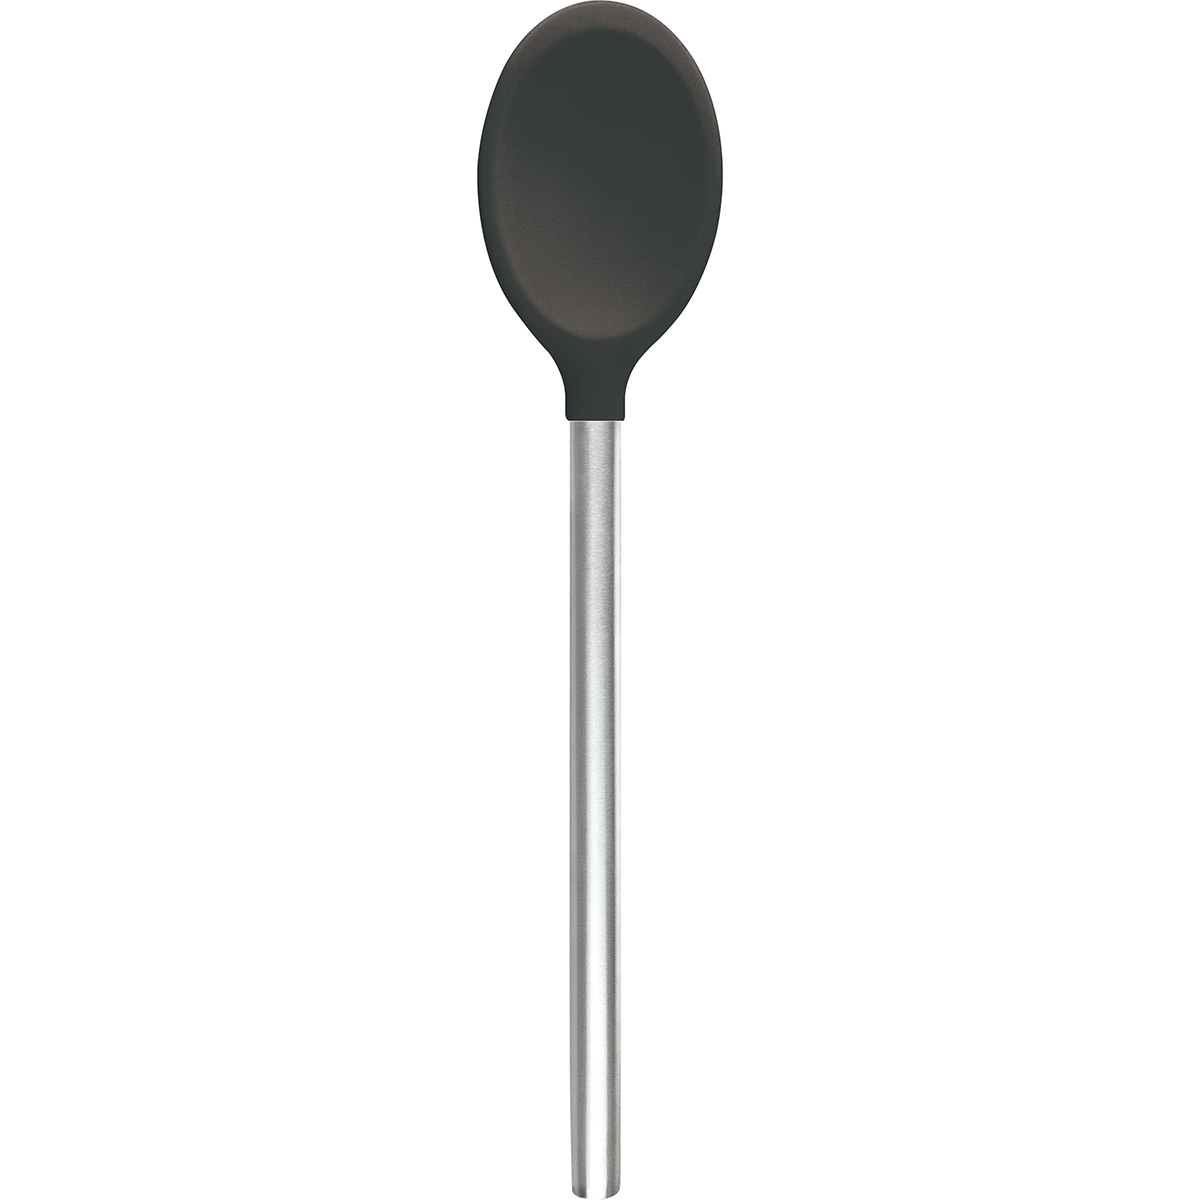 https://www.containerstore.com/catalogimages/423614/10086198-Silicone_Mixing_Spoon_Charc.jpg